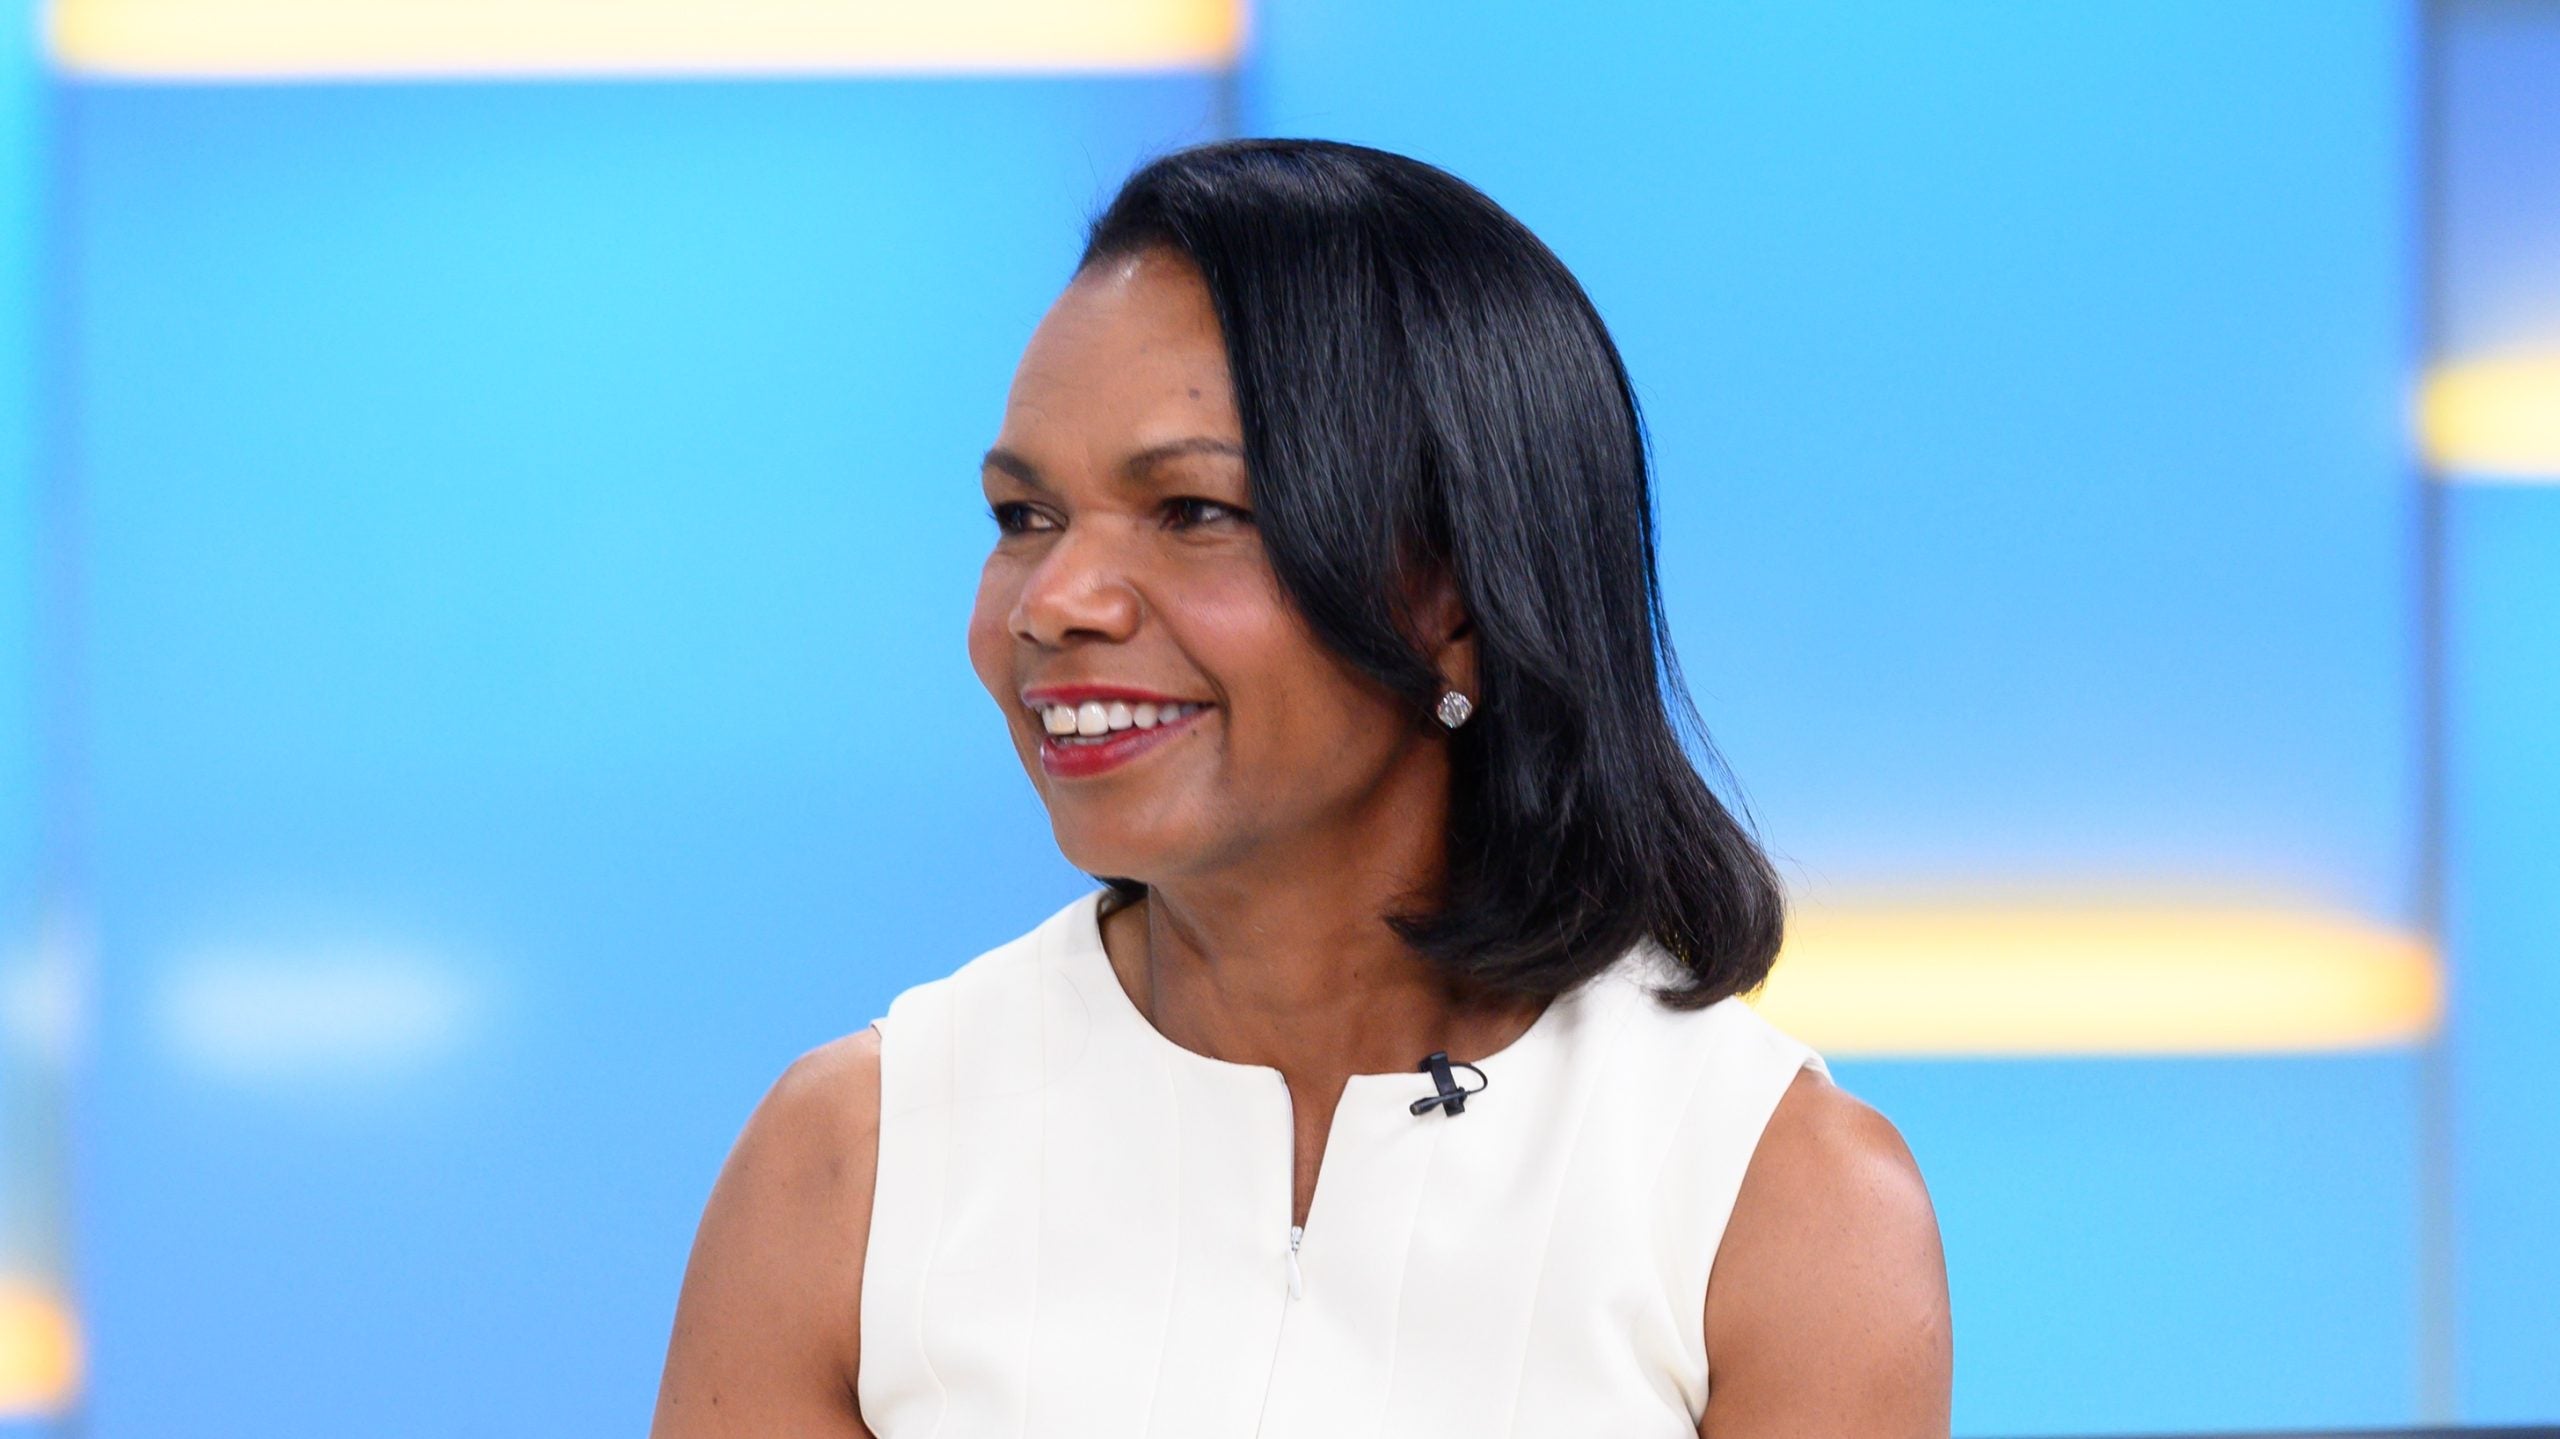 Former Secretary of State Condoleezza Rice Says It's Time To "Move On" From Jan. 6 Insurrection